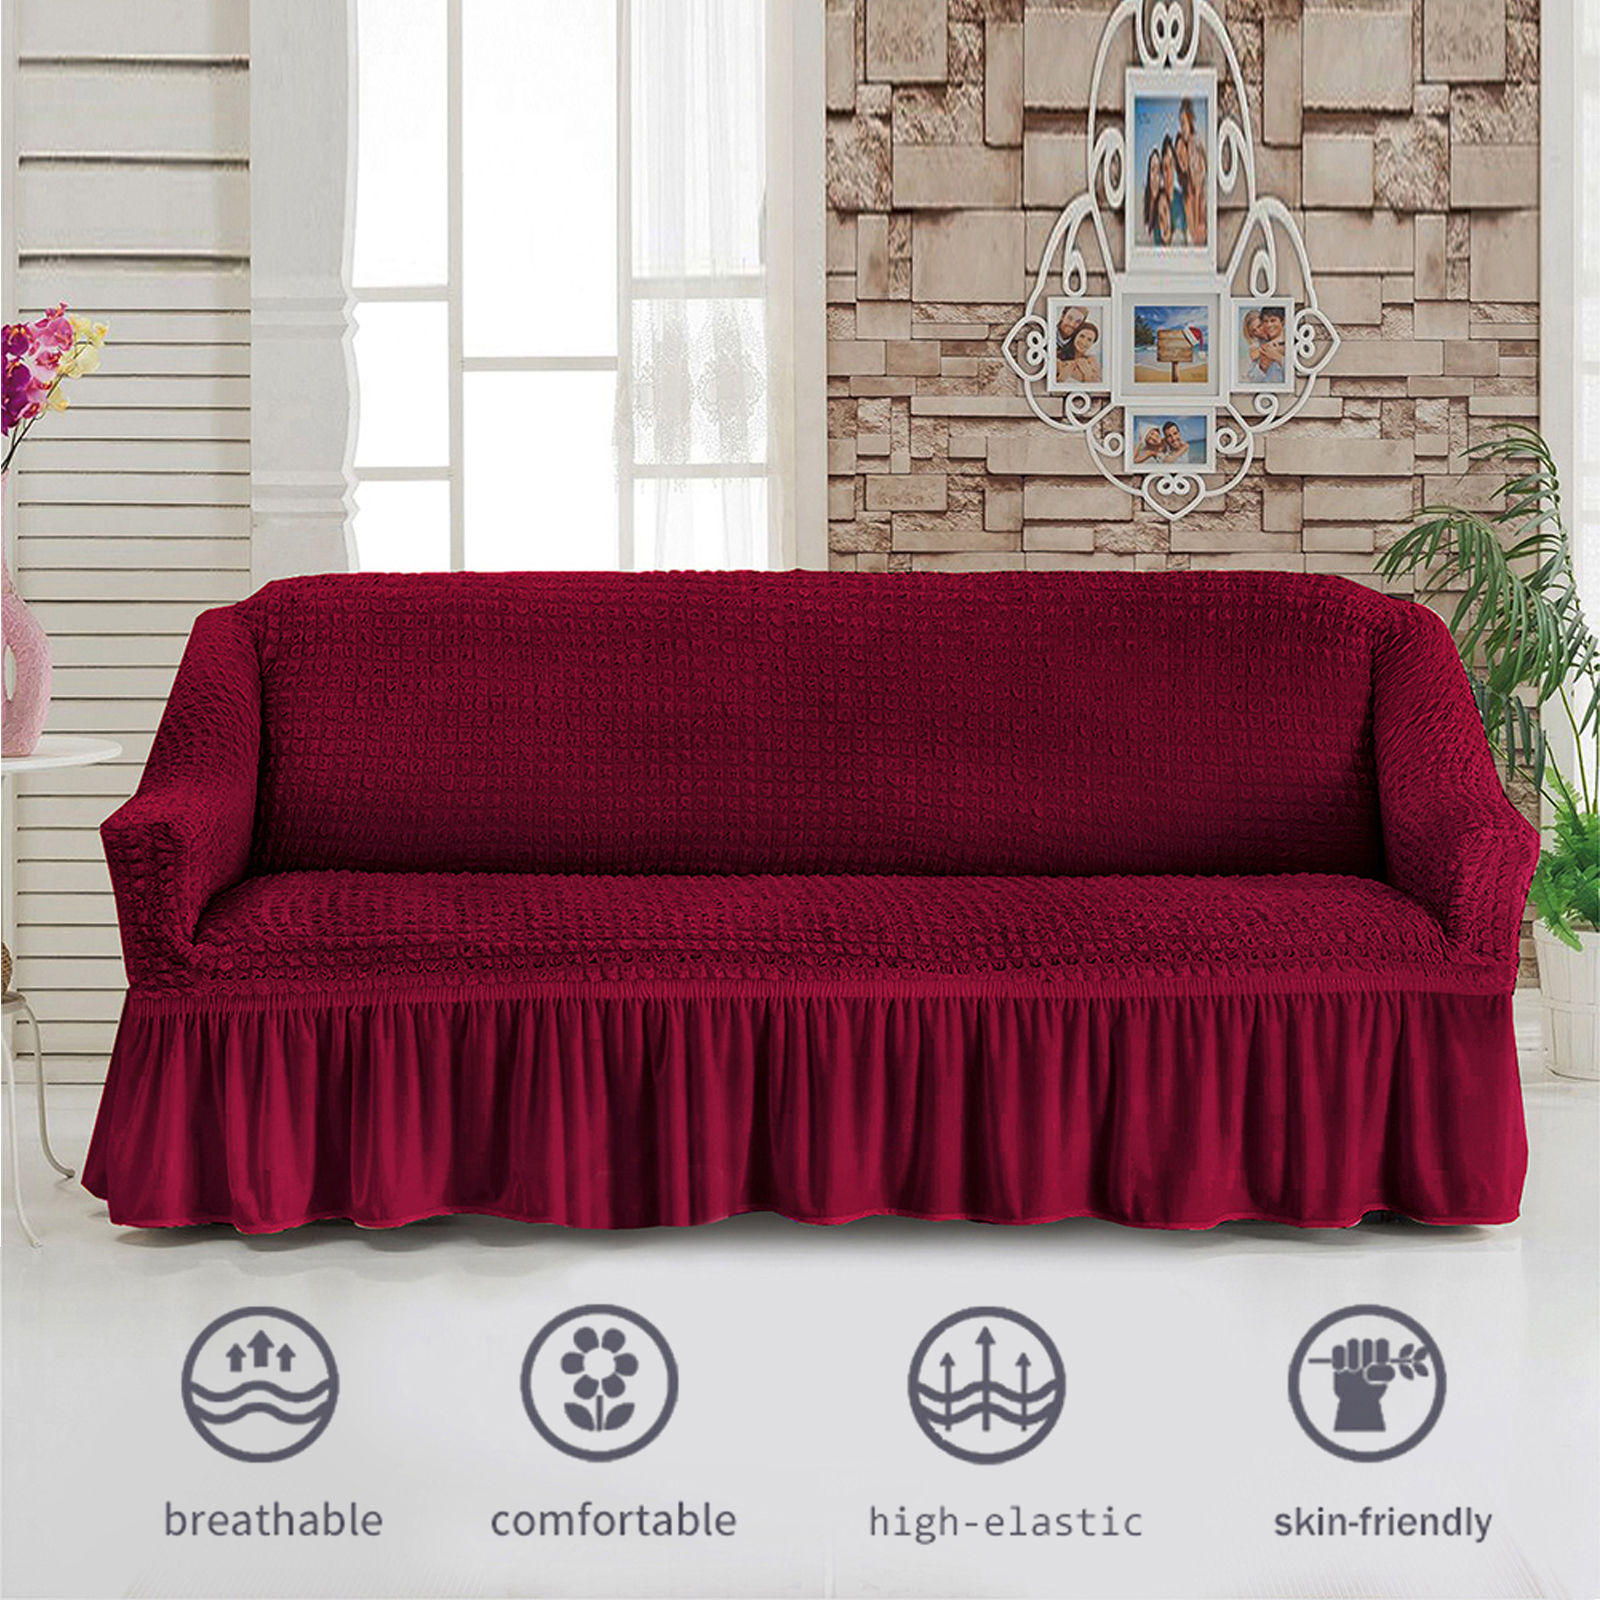 Stretch Sofa Slipcover, 3 Seater Sofa Slipcovers With Skirt With Armless Soft Sofa Cover Elastic Straps Sofa Slipcover For Living Room Kids Pets-red-Medium